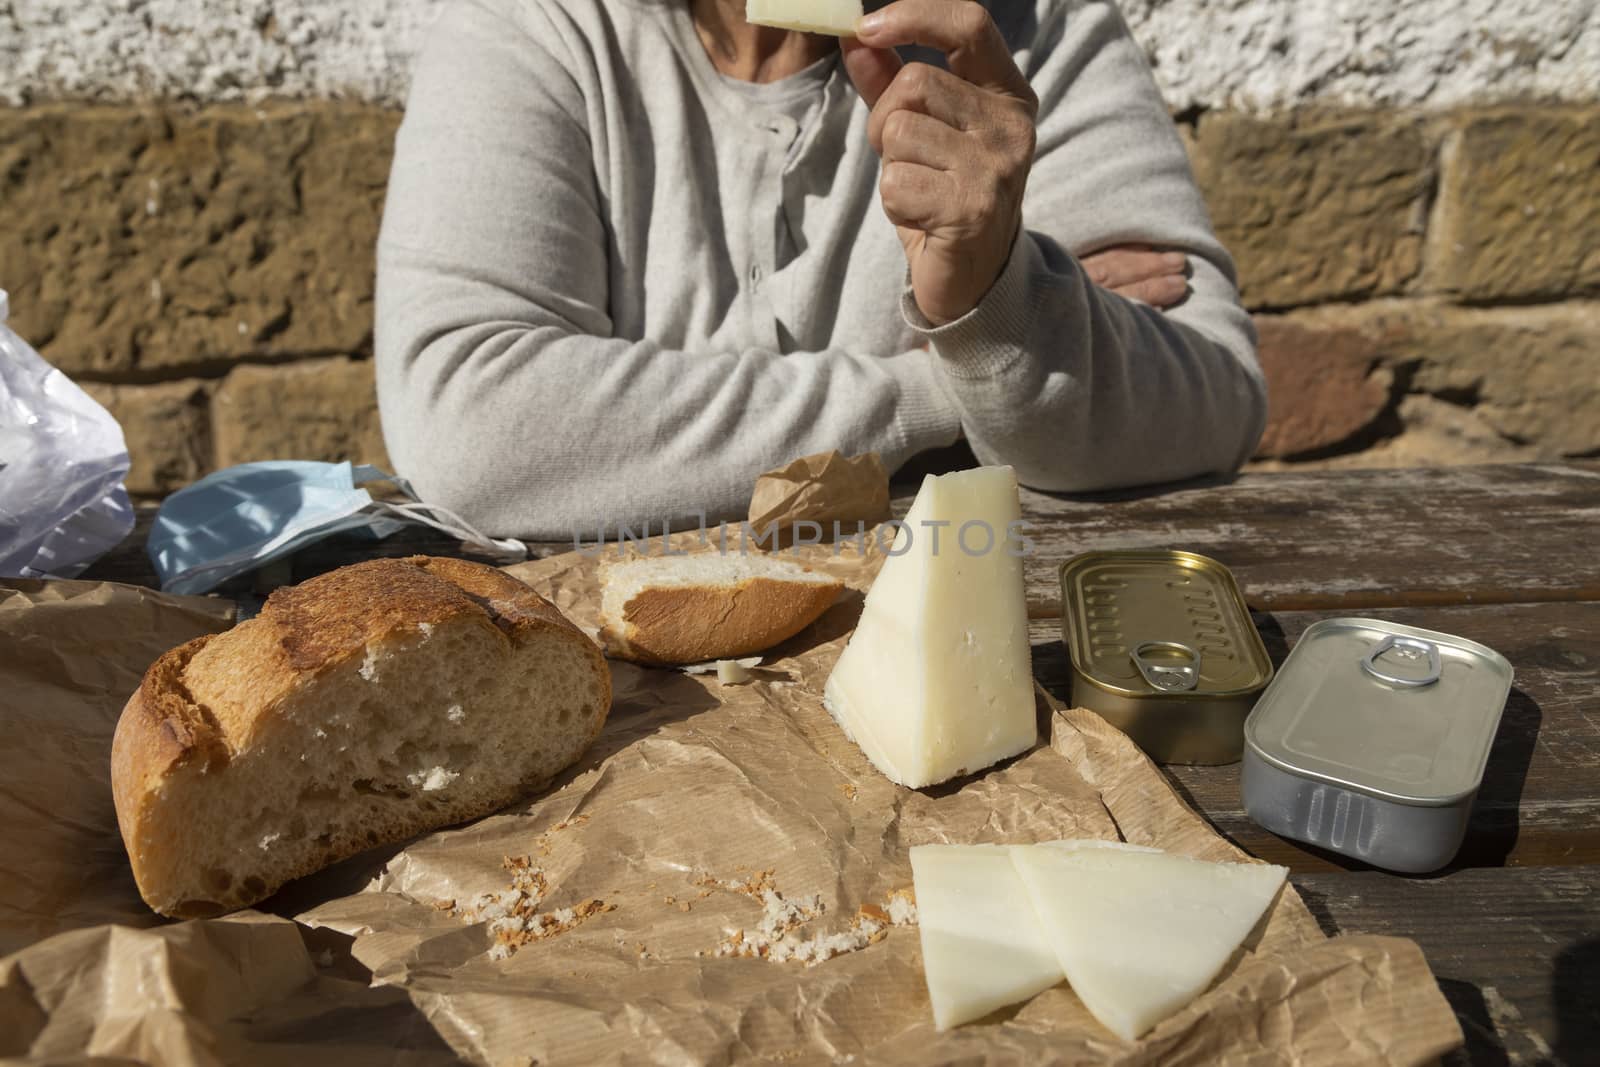 A senior woman, eats slices of goat cheese, Spain by alvarobueno